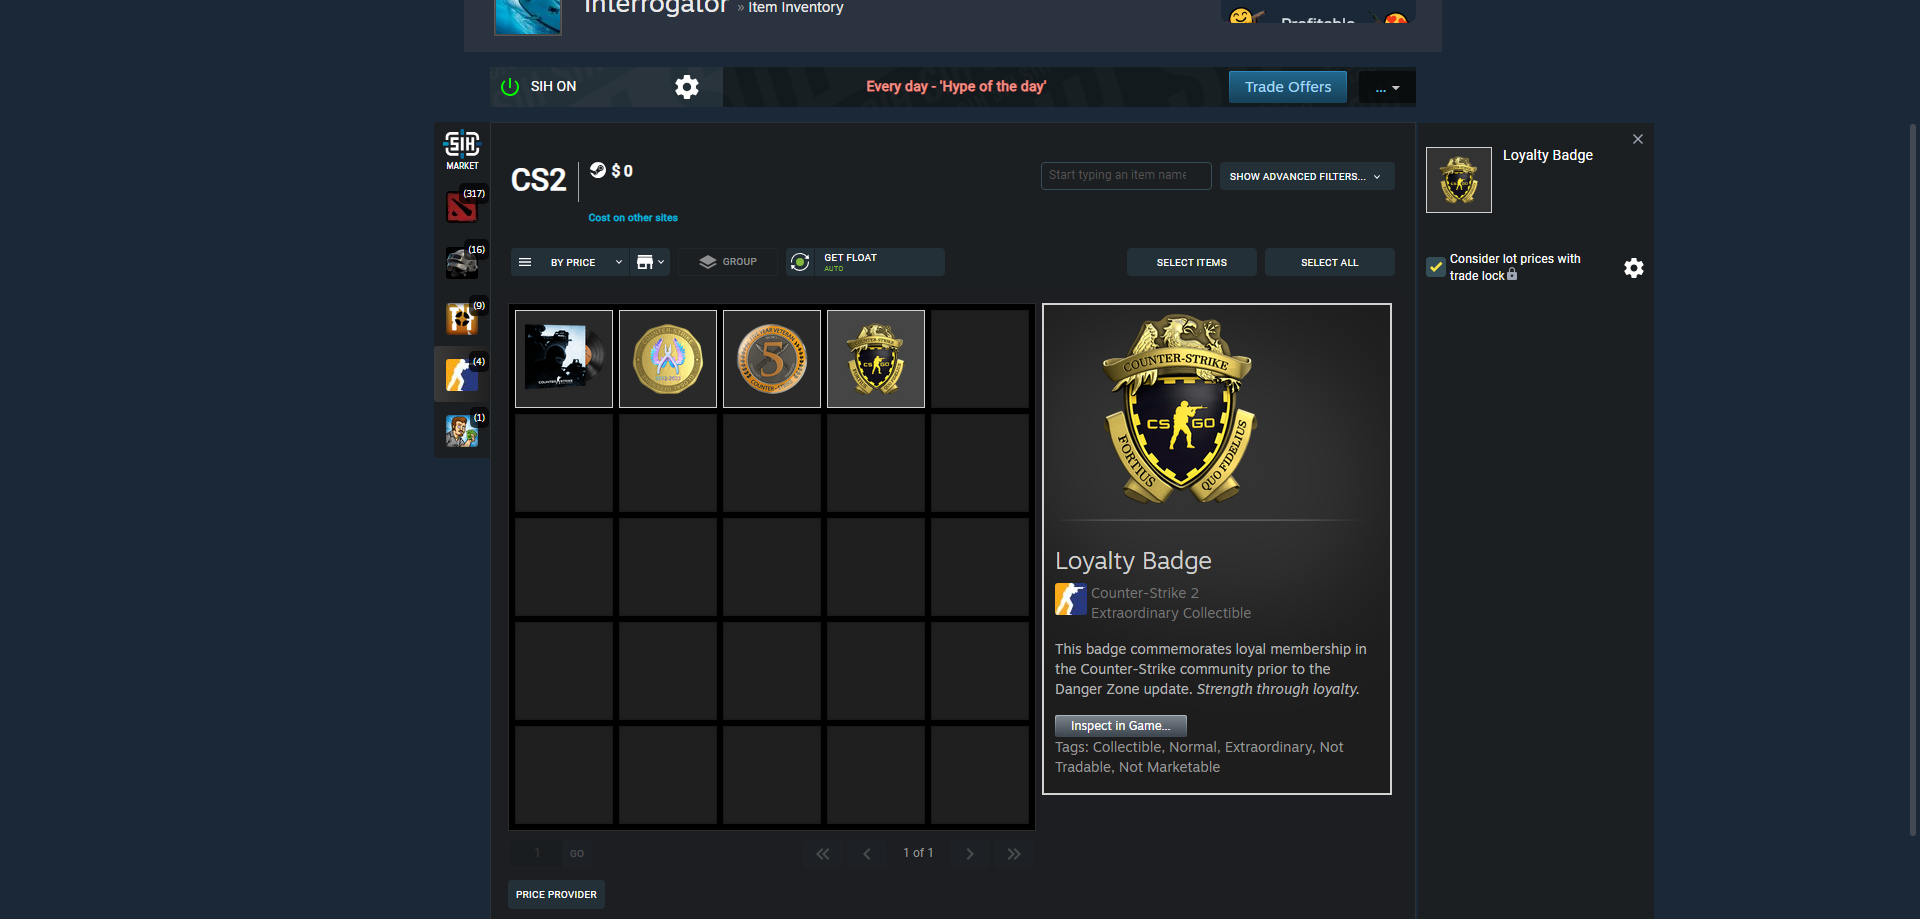 CSGO PRIME/66LVL_Behavior: 9219 _(Loyalty/Global Offensive/5Y MEDALS)_Previous Rank: Archon 4 (2772 - 2925 MMR)_2379 hours_Phone Number